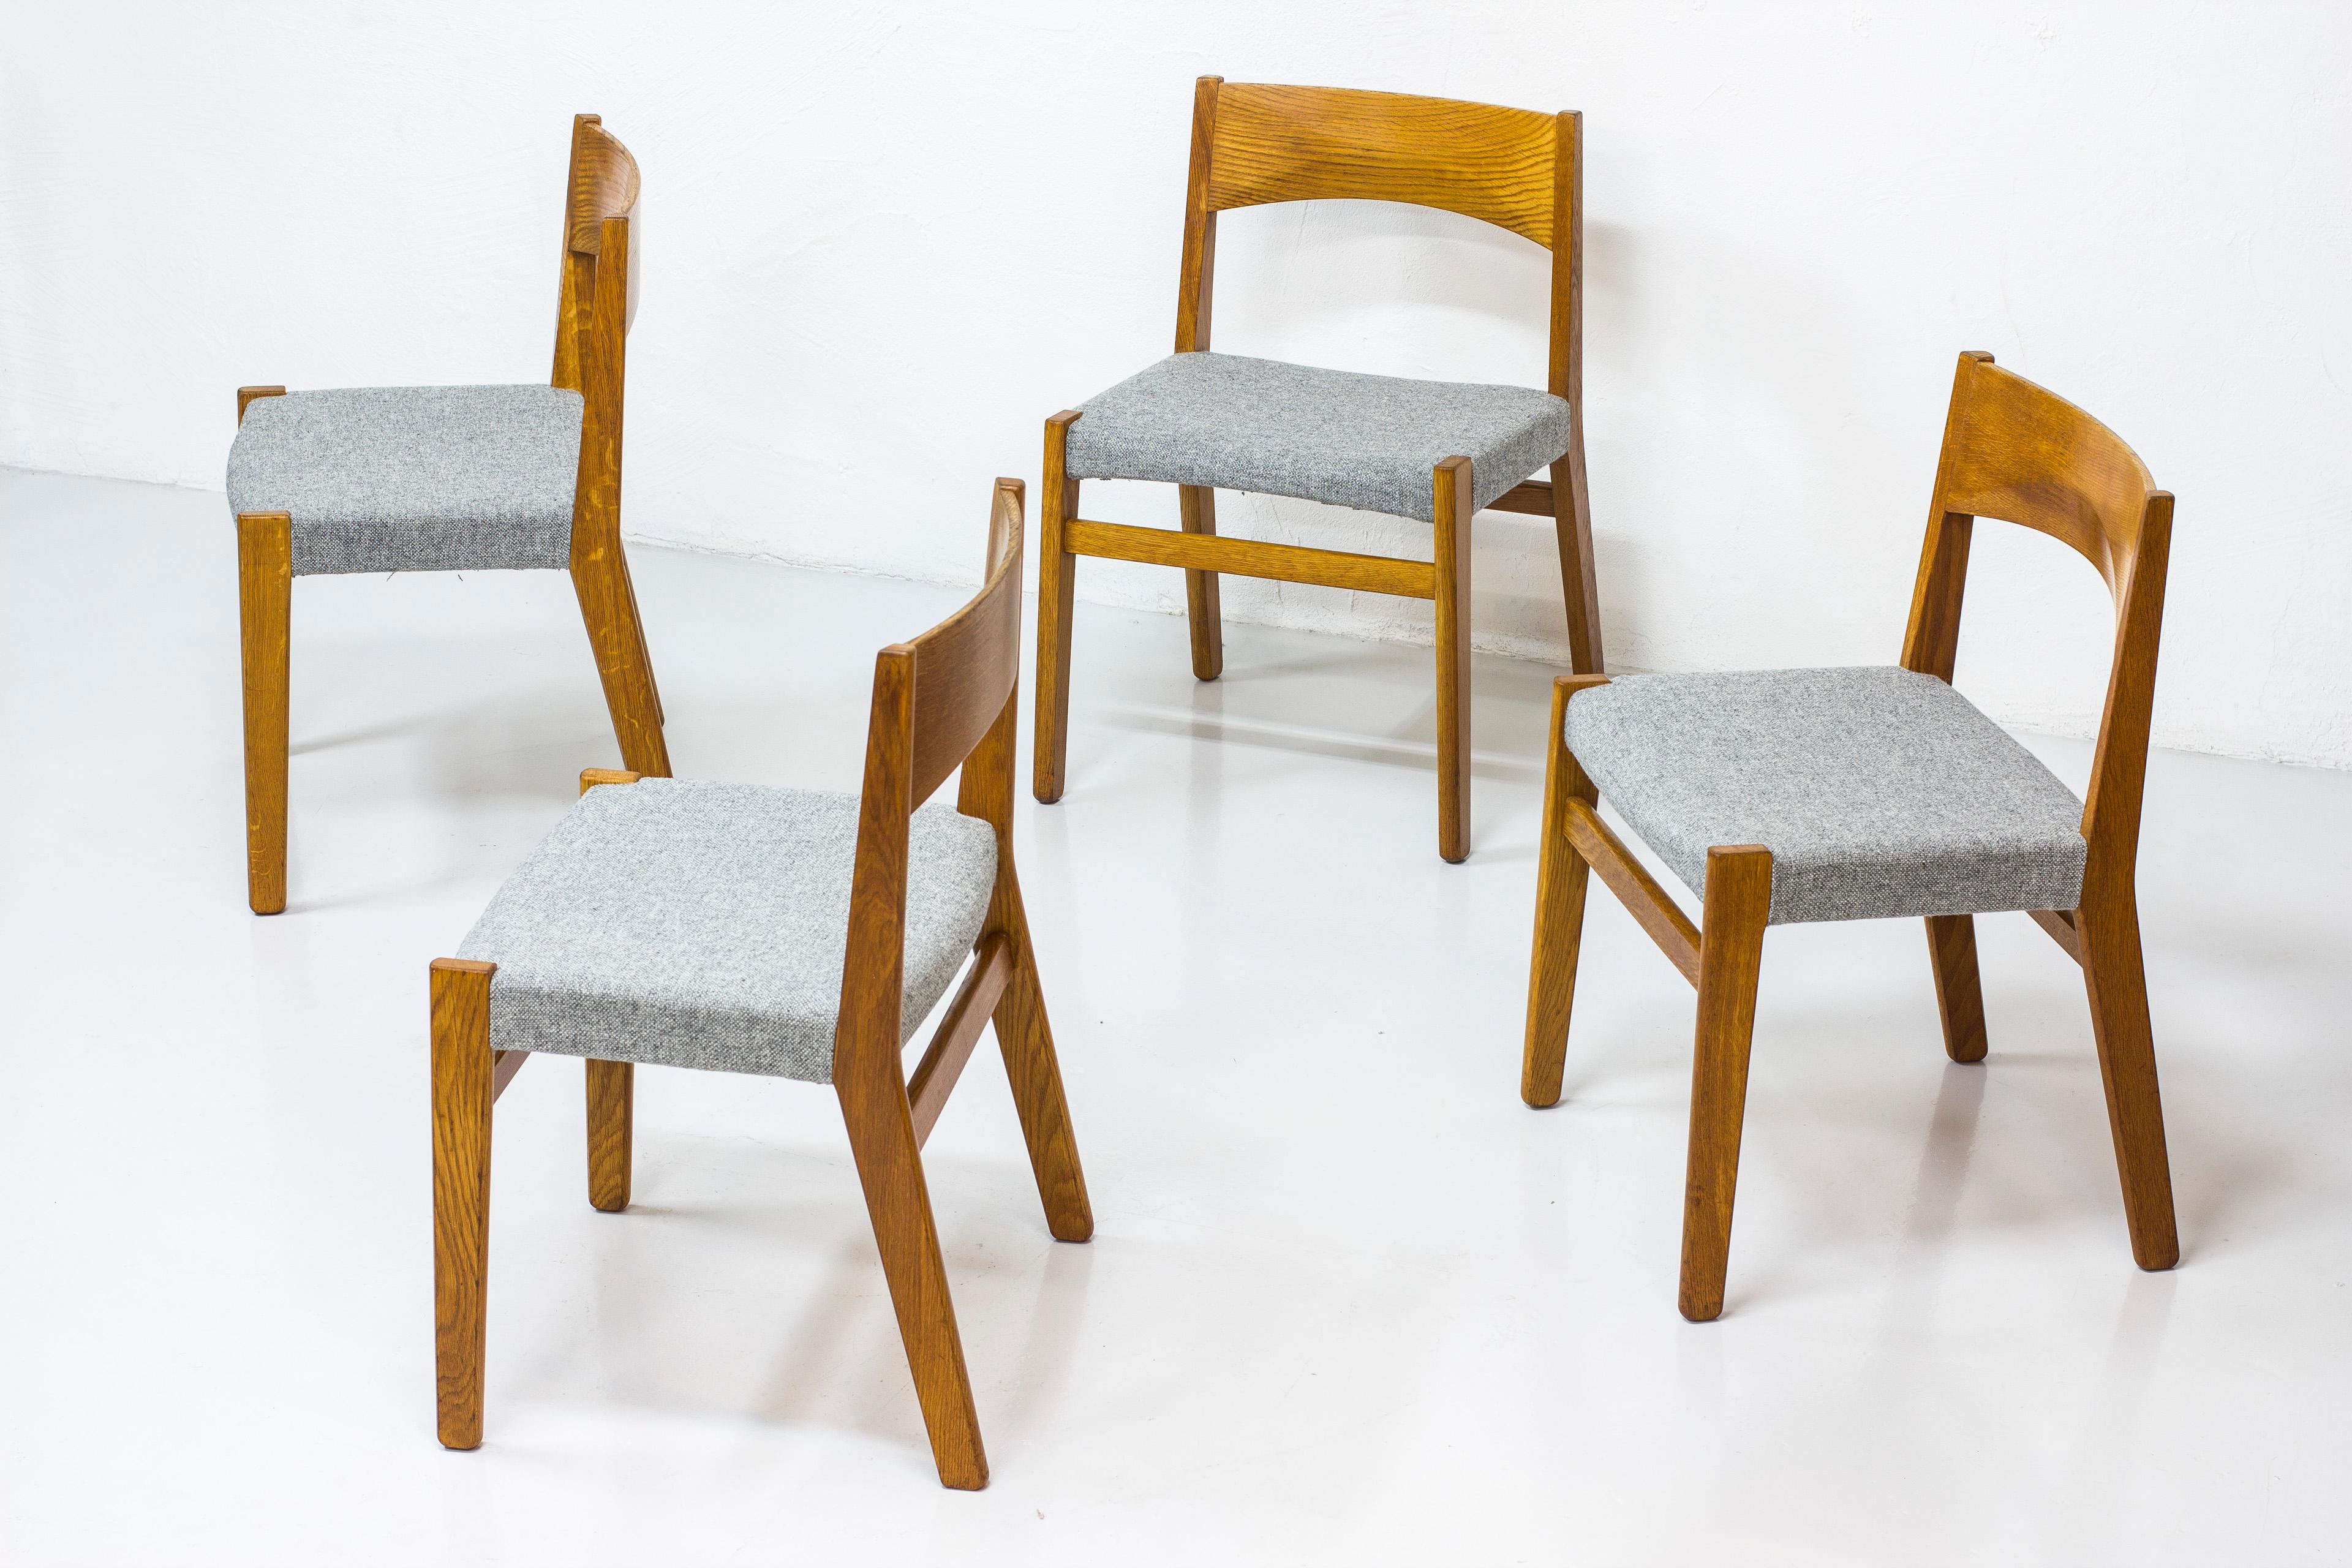 Set of four dining chairs designed by John Vedel Rieper. Produced in Denmark by Erhard Rasmussen. First presented at the Copenhagen Cabinetmakers’ Guild exhibition in 1957. Made from solid oak with new 